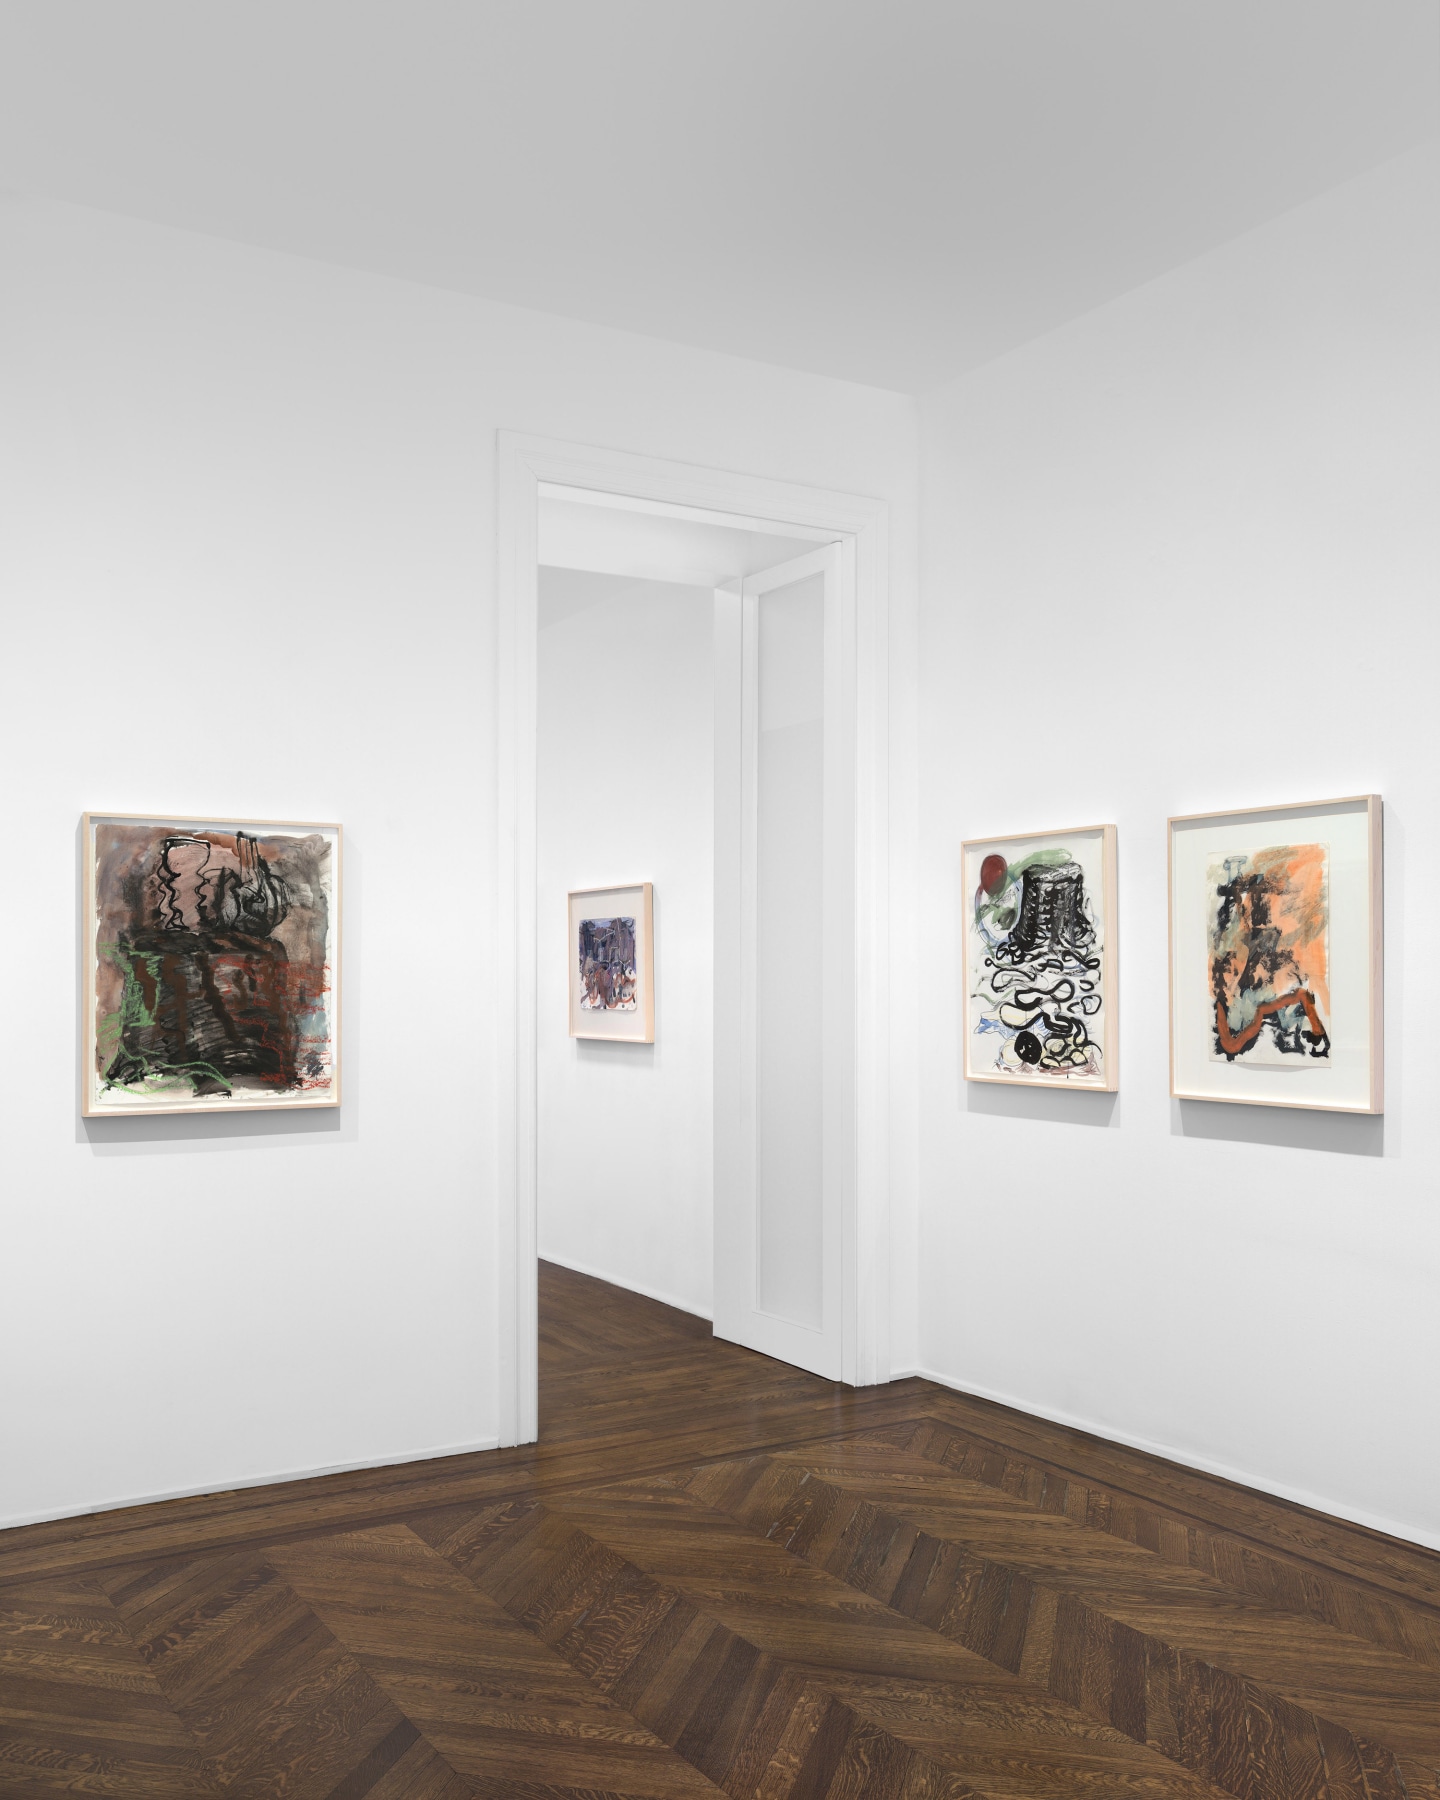 PER KIRKEBY Works on Paper, Works in Brick 20 November 2019 through 25 January 2020 UPPER EAST SIDE, NEW YORK, Installation View 13